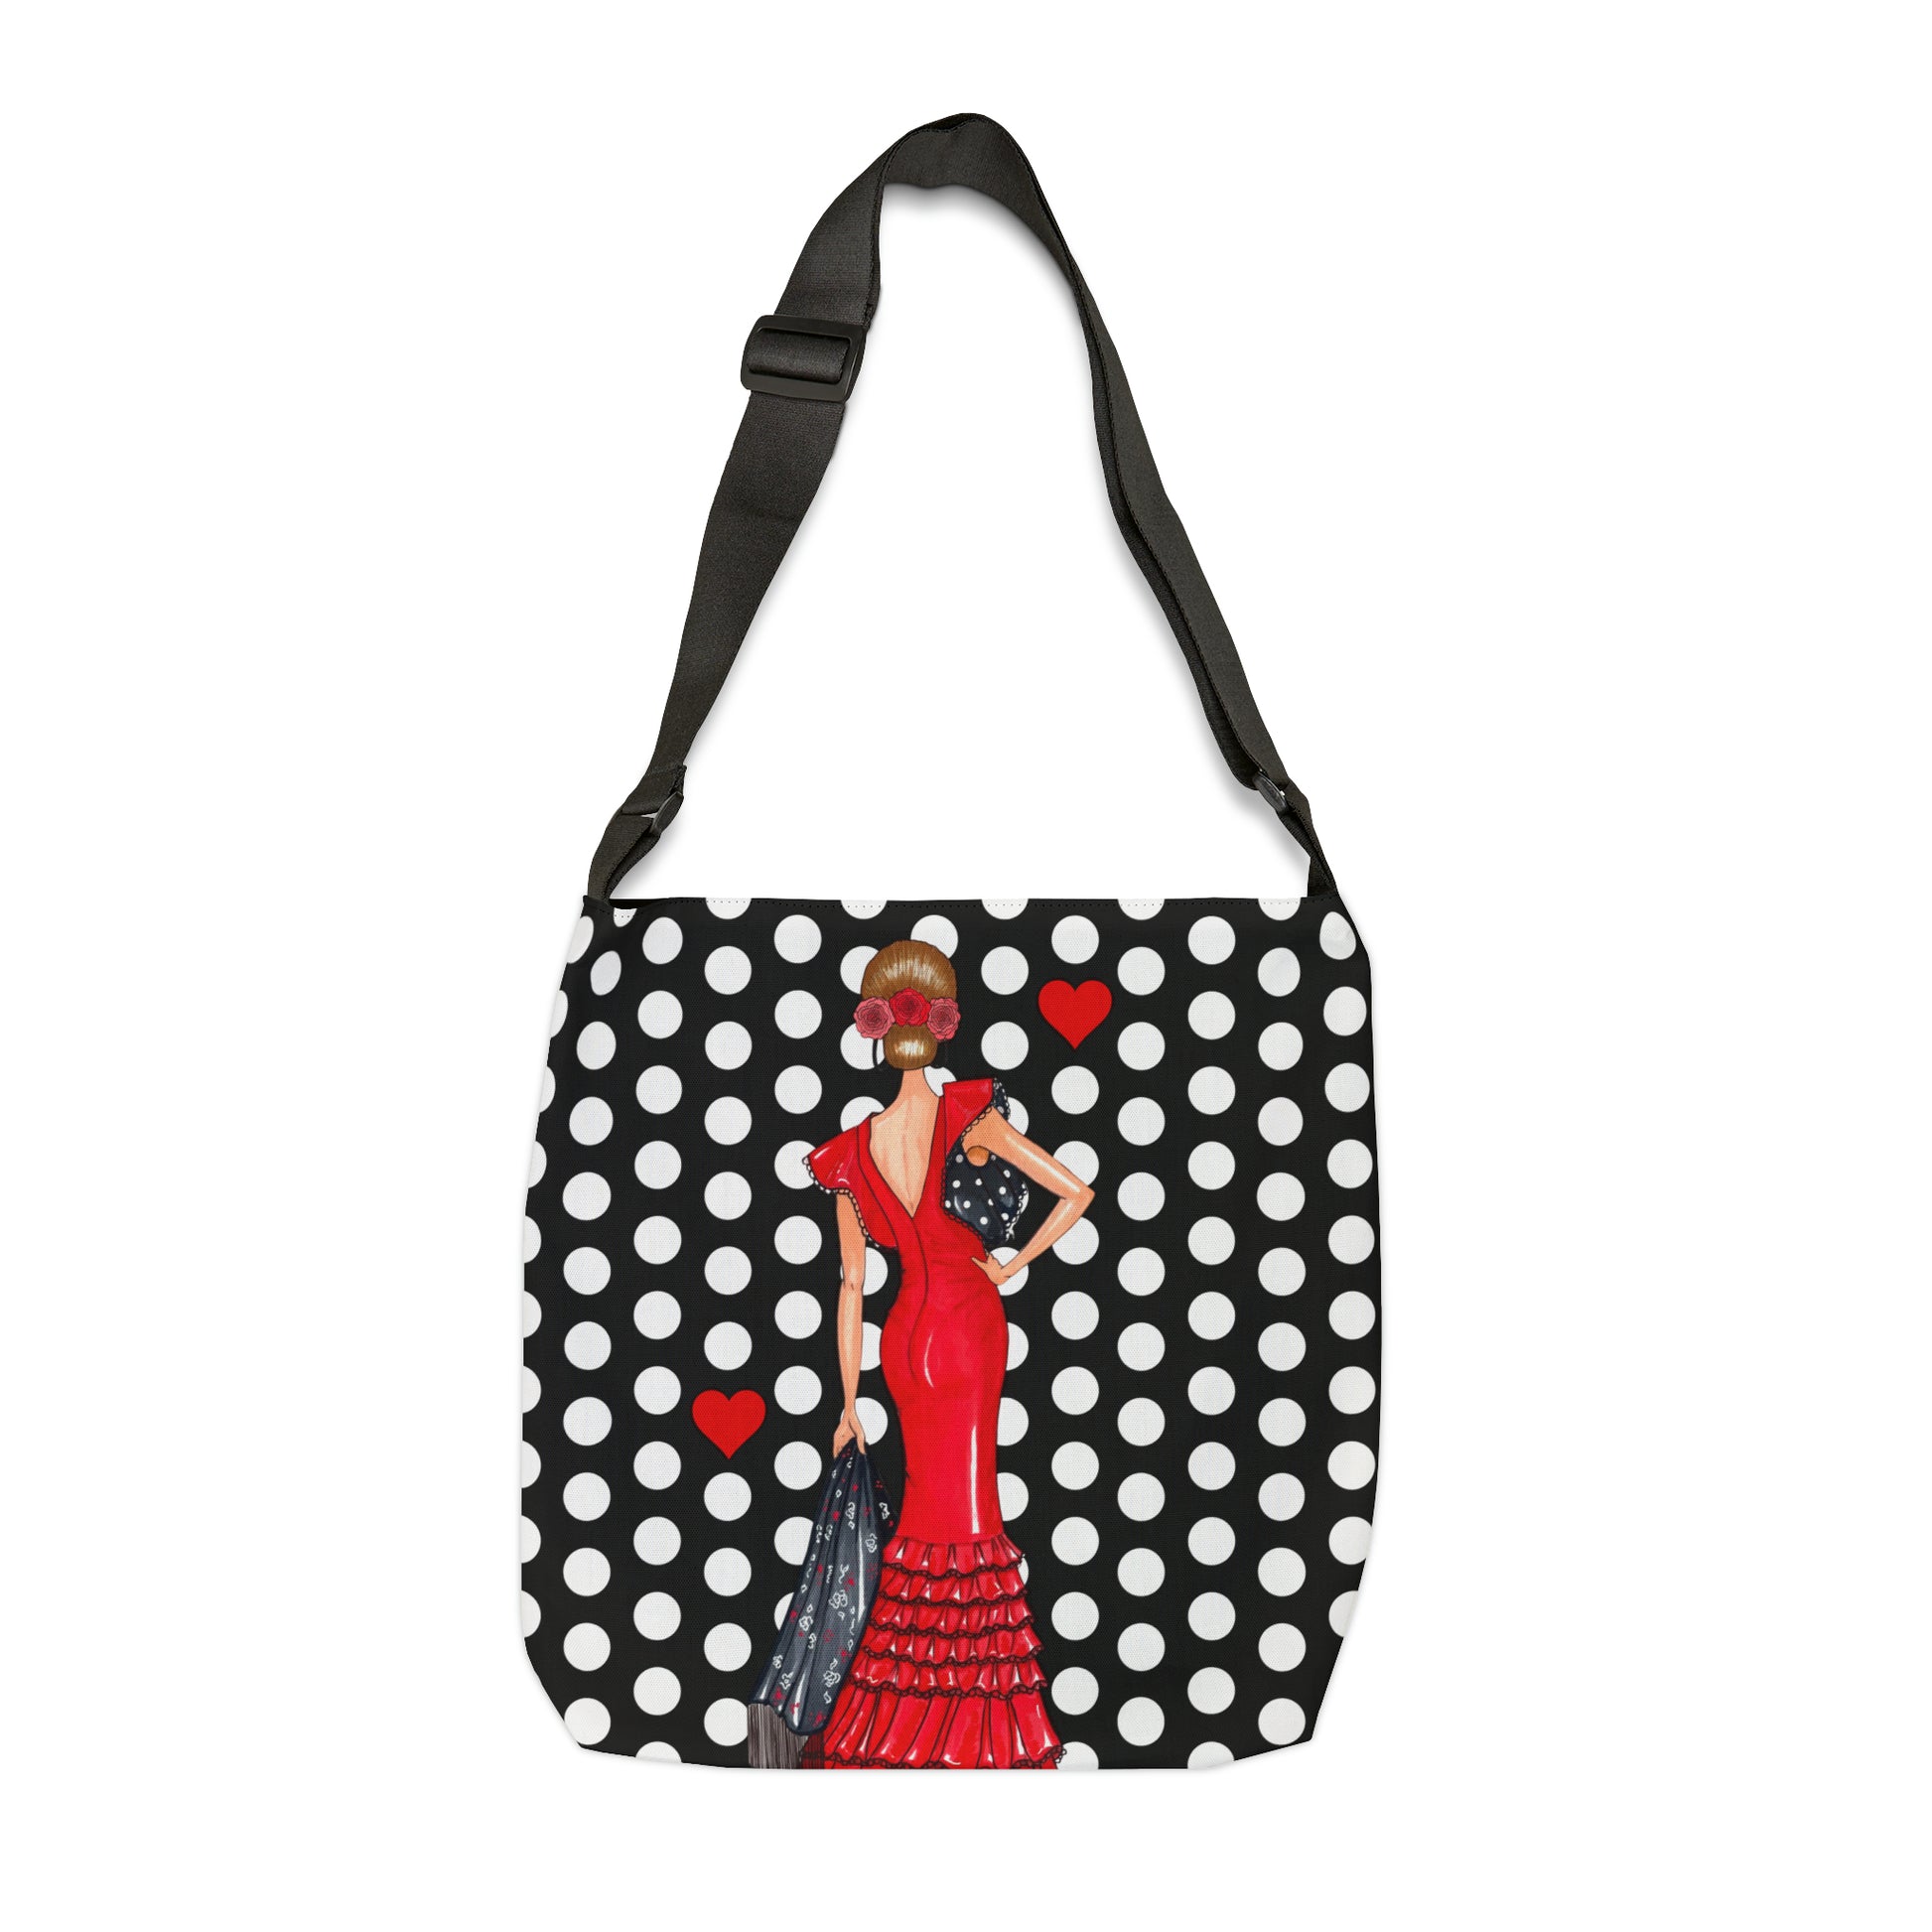 a black and white polka dot purse with a woman in a red dress